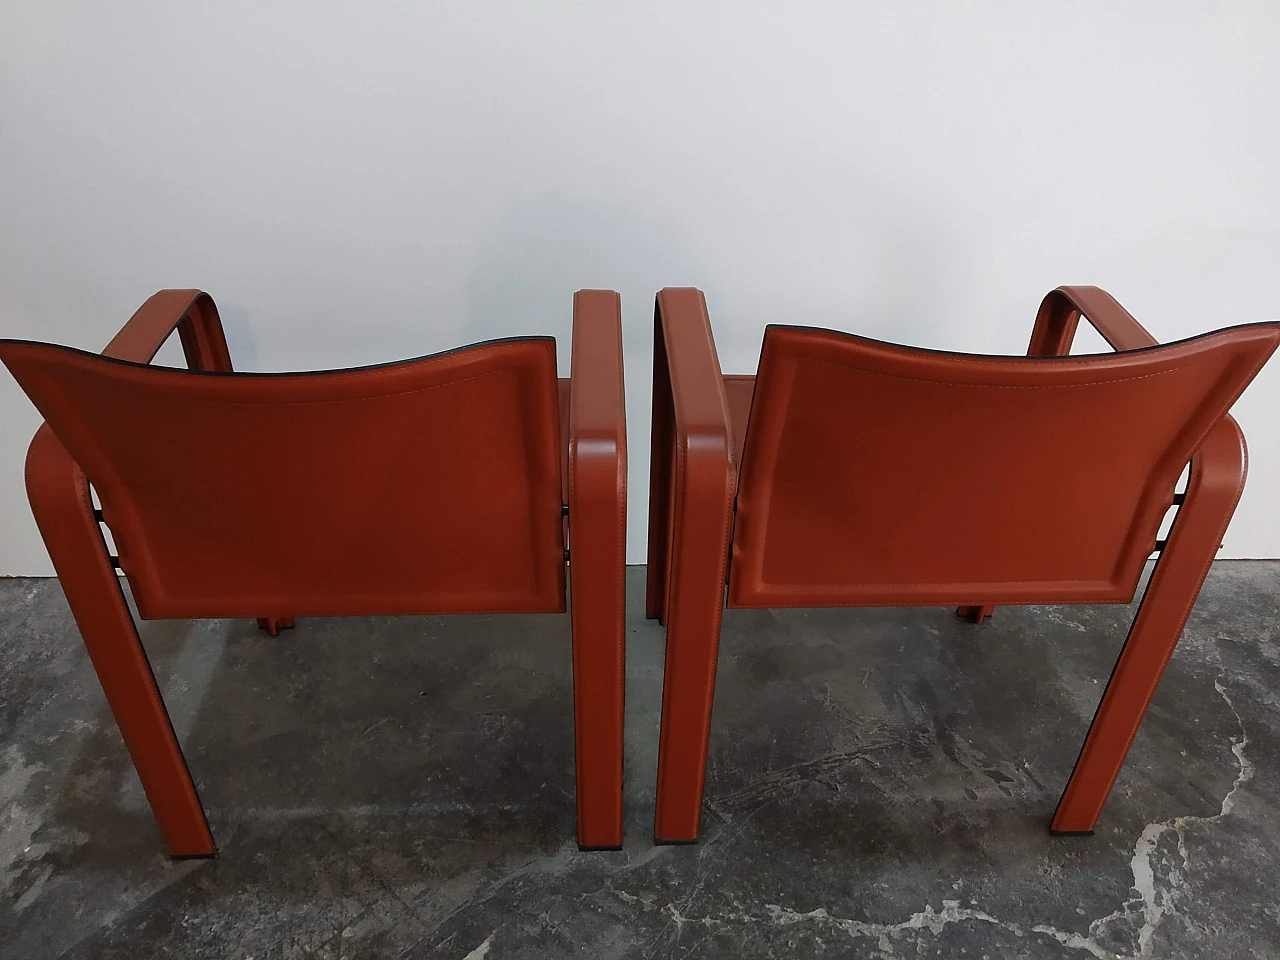 Pair of Golfo dei Poeti chairs by Toussaint & Angeloni manufactured by Matteo Grassi, 1980s 20